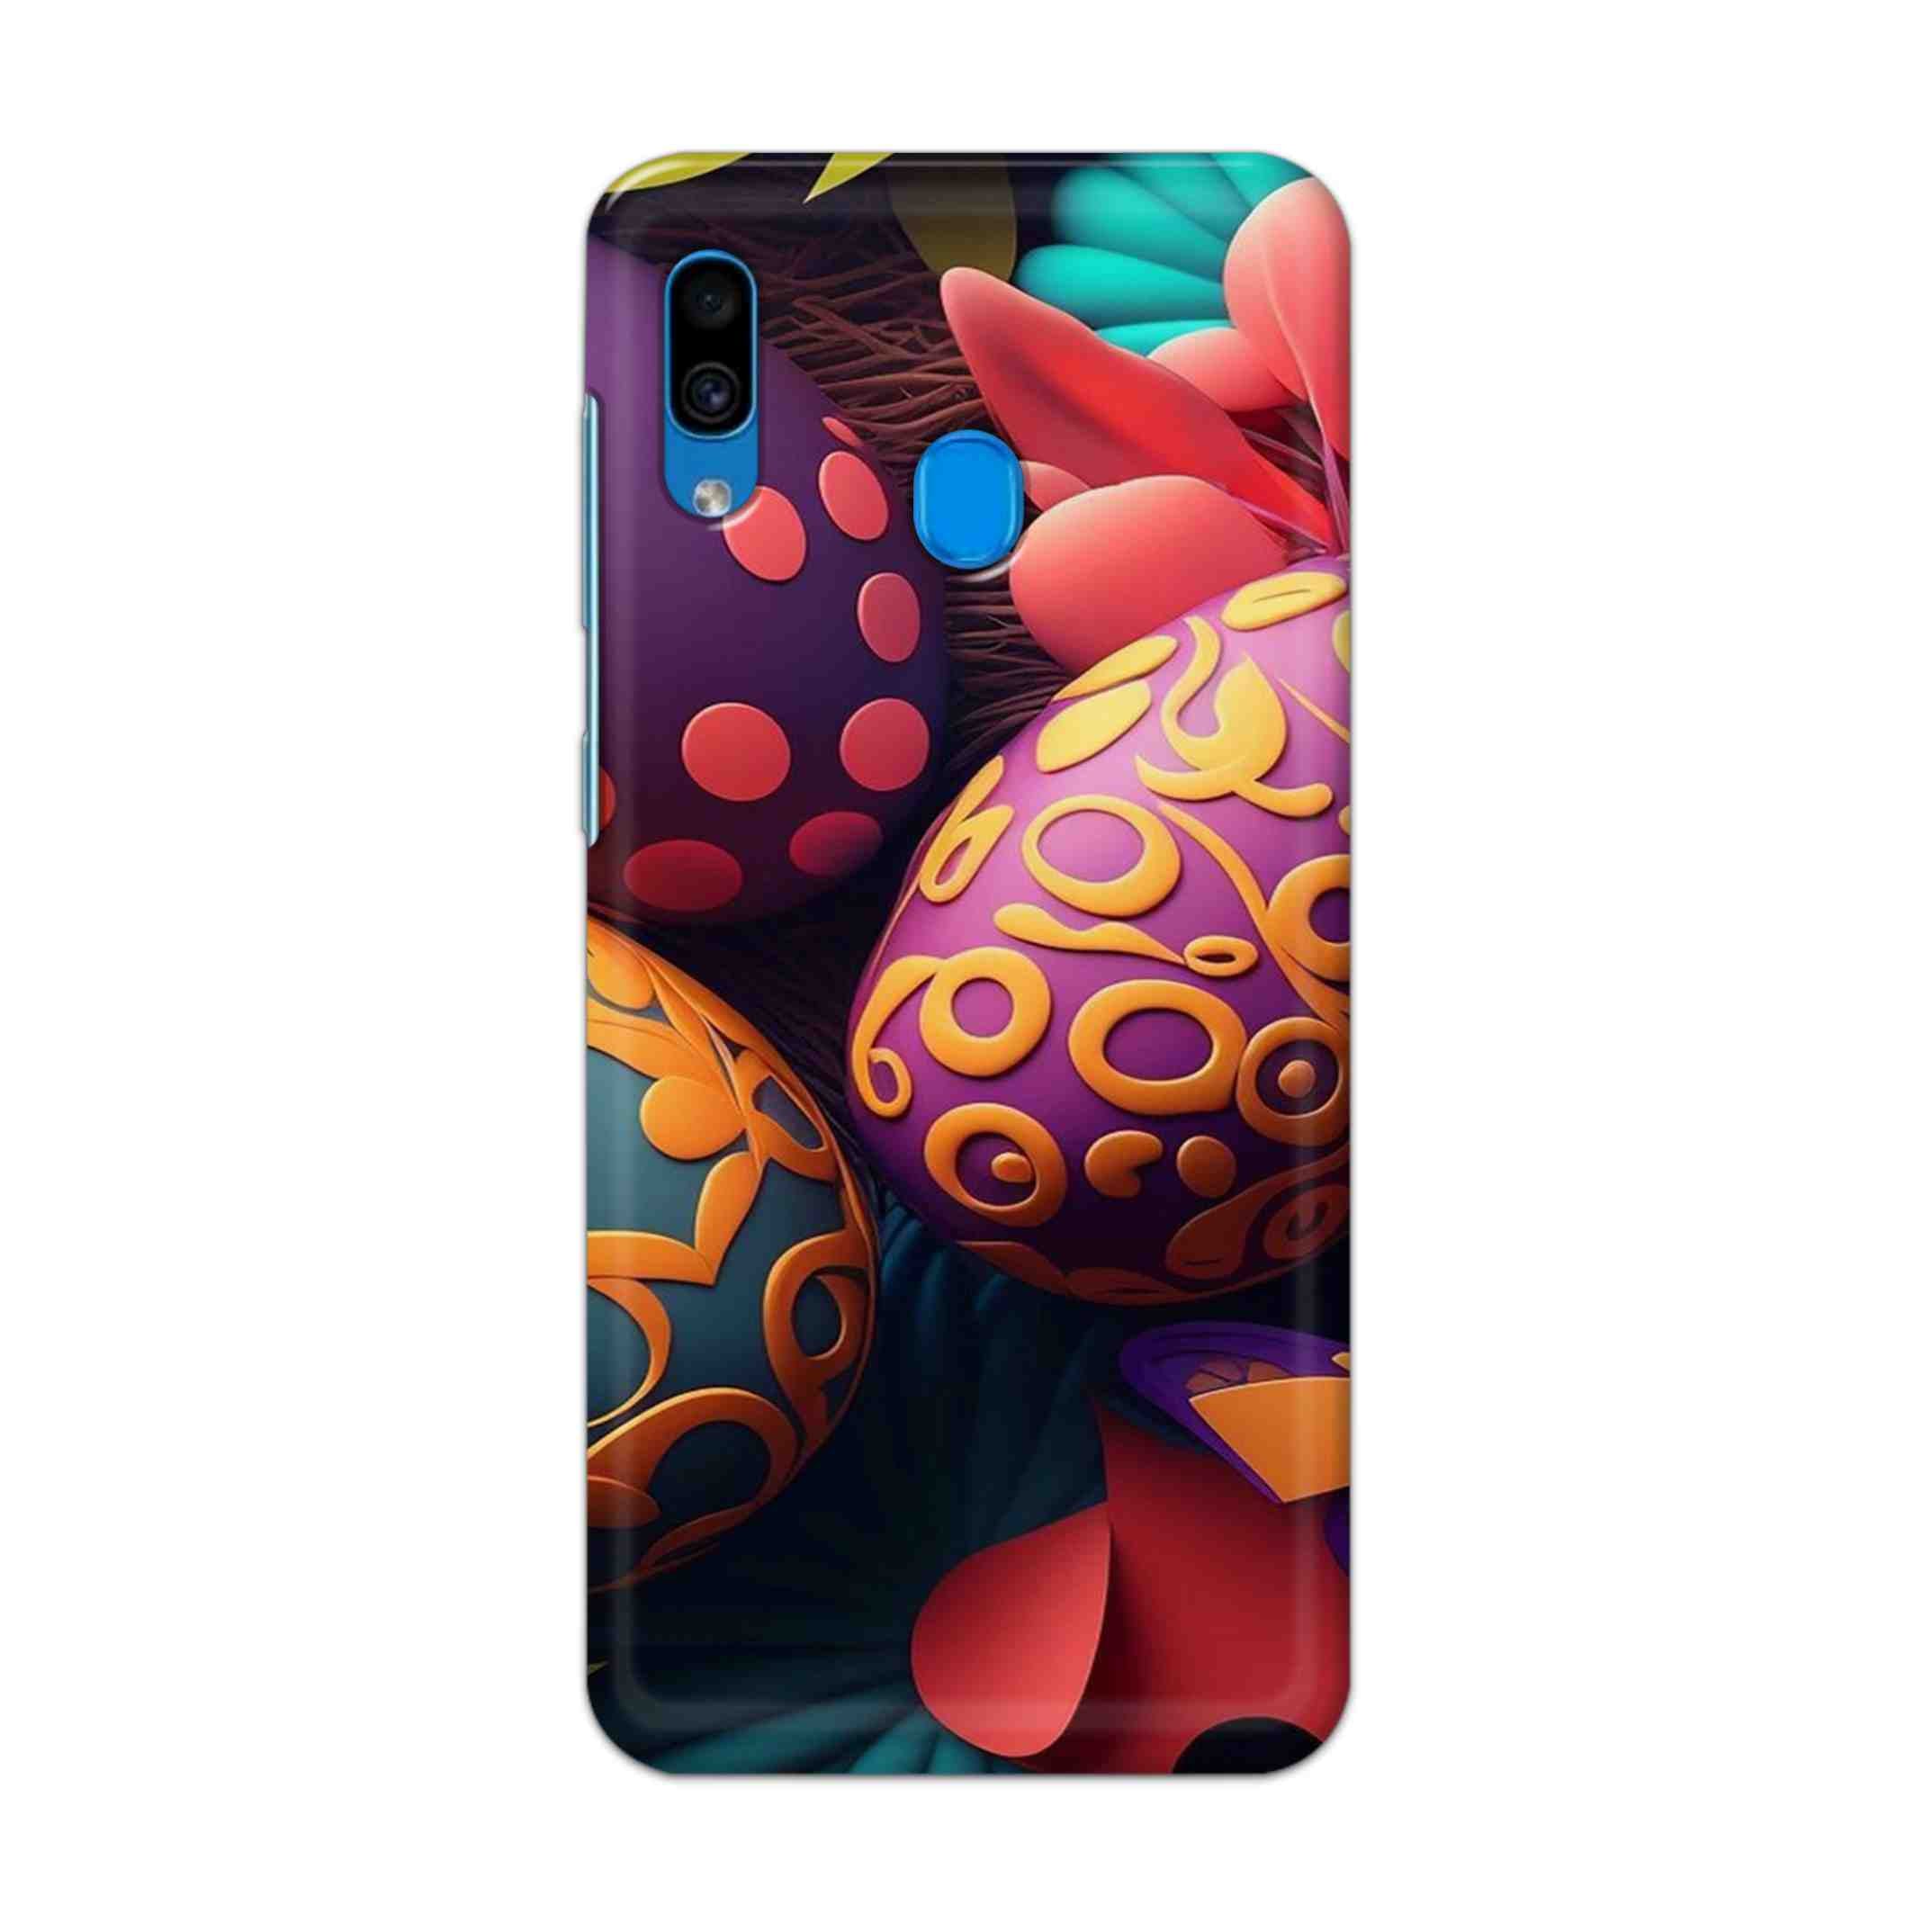 Buy Easter Egg Hard Back Mobile Phone Case Cover For Samsung Galaxy A30 Online